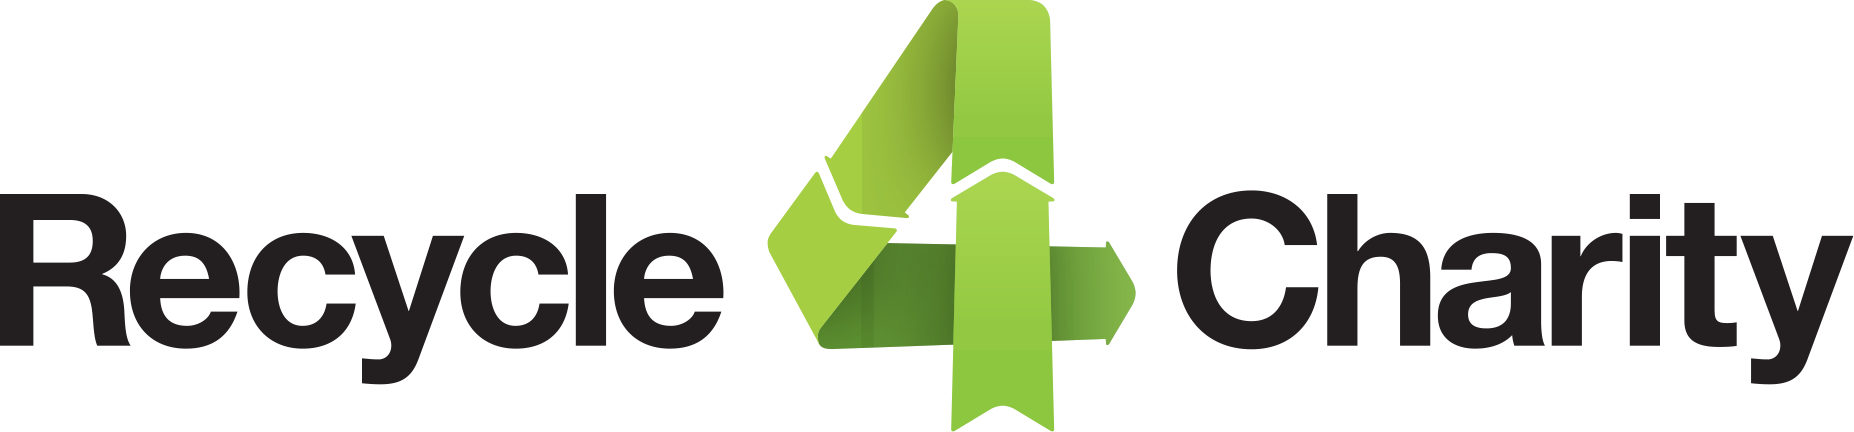 Recycle4Charity logo